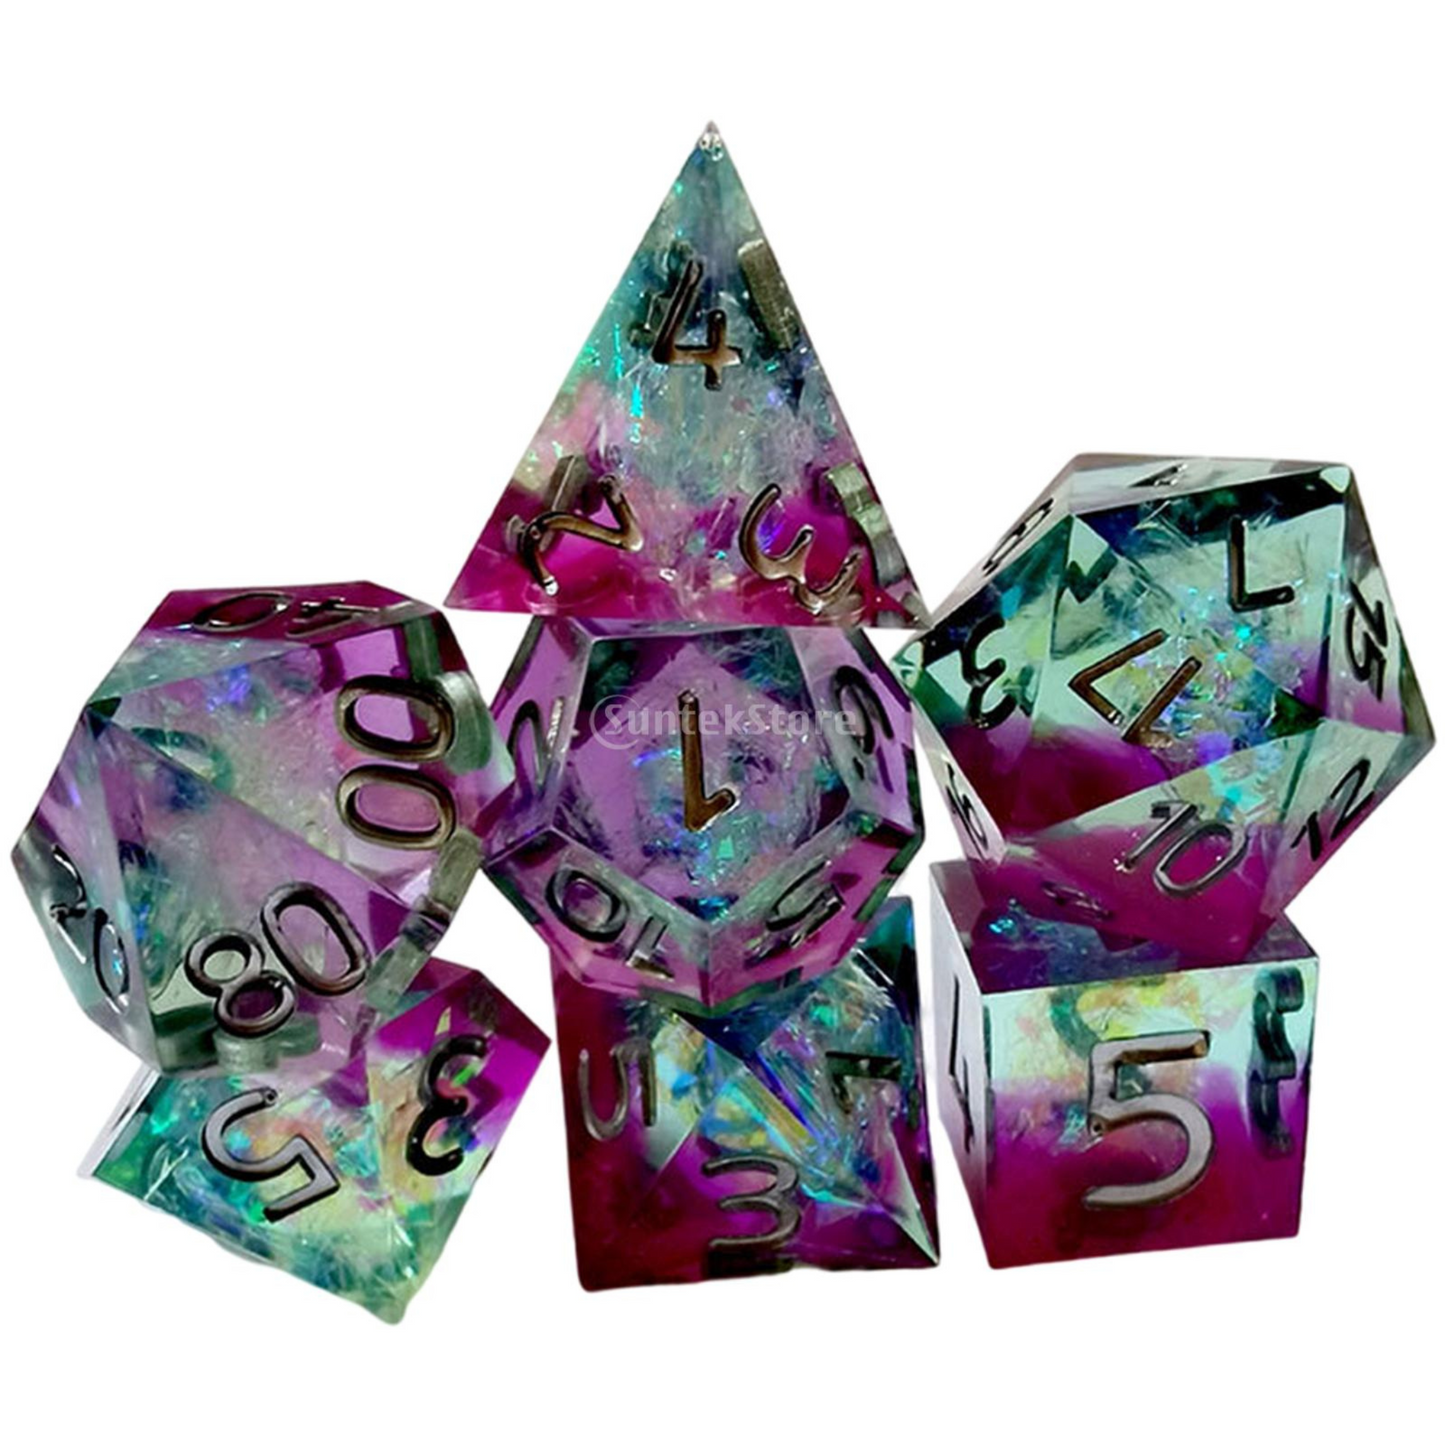 MagiDeal Blood Effect Sharp Resin Polyhedral Dice Set